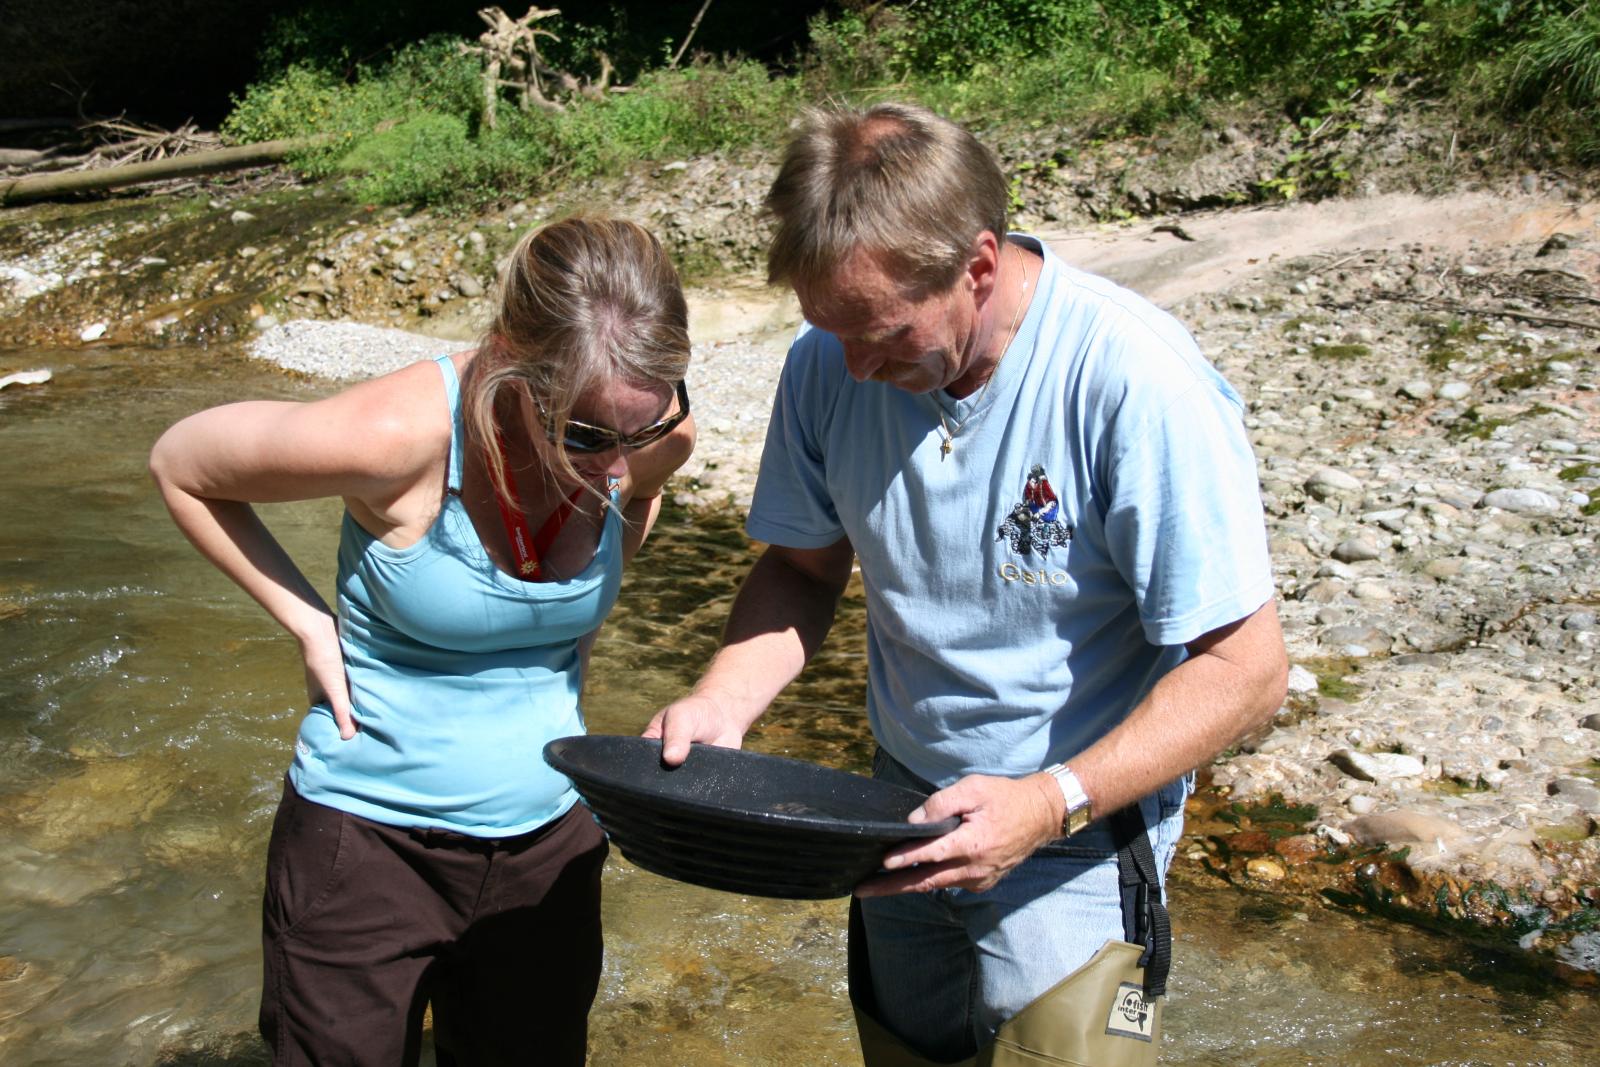 Panning for Gold in Switzerland